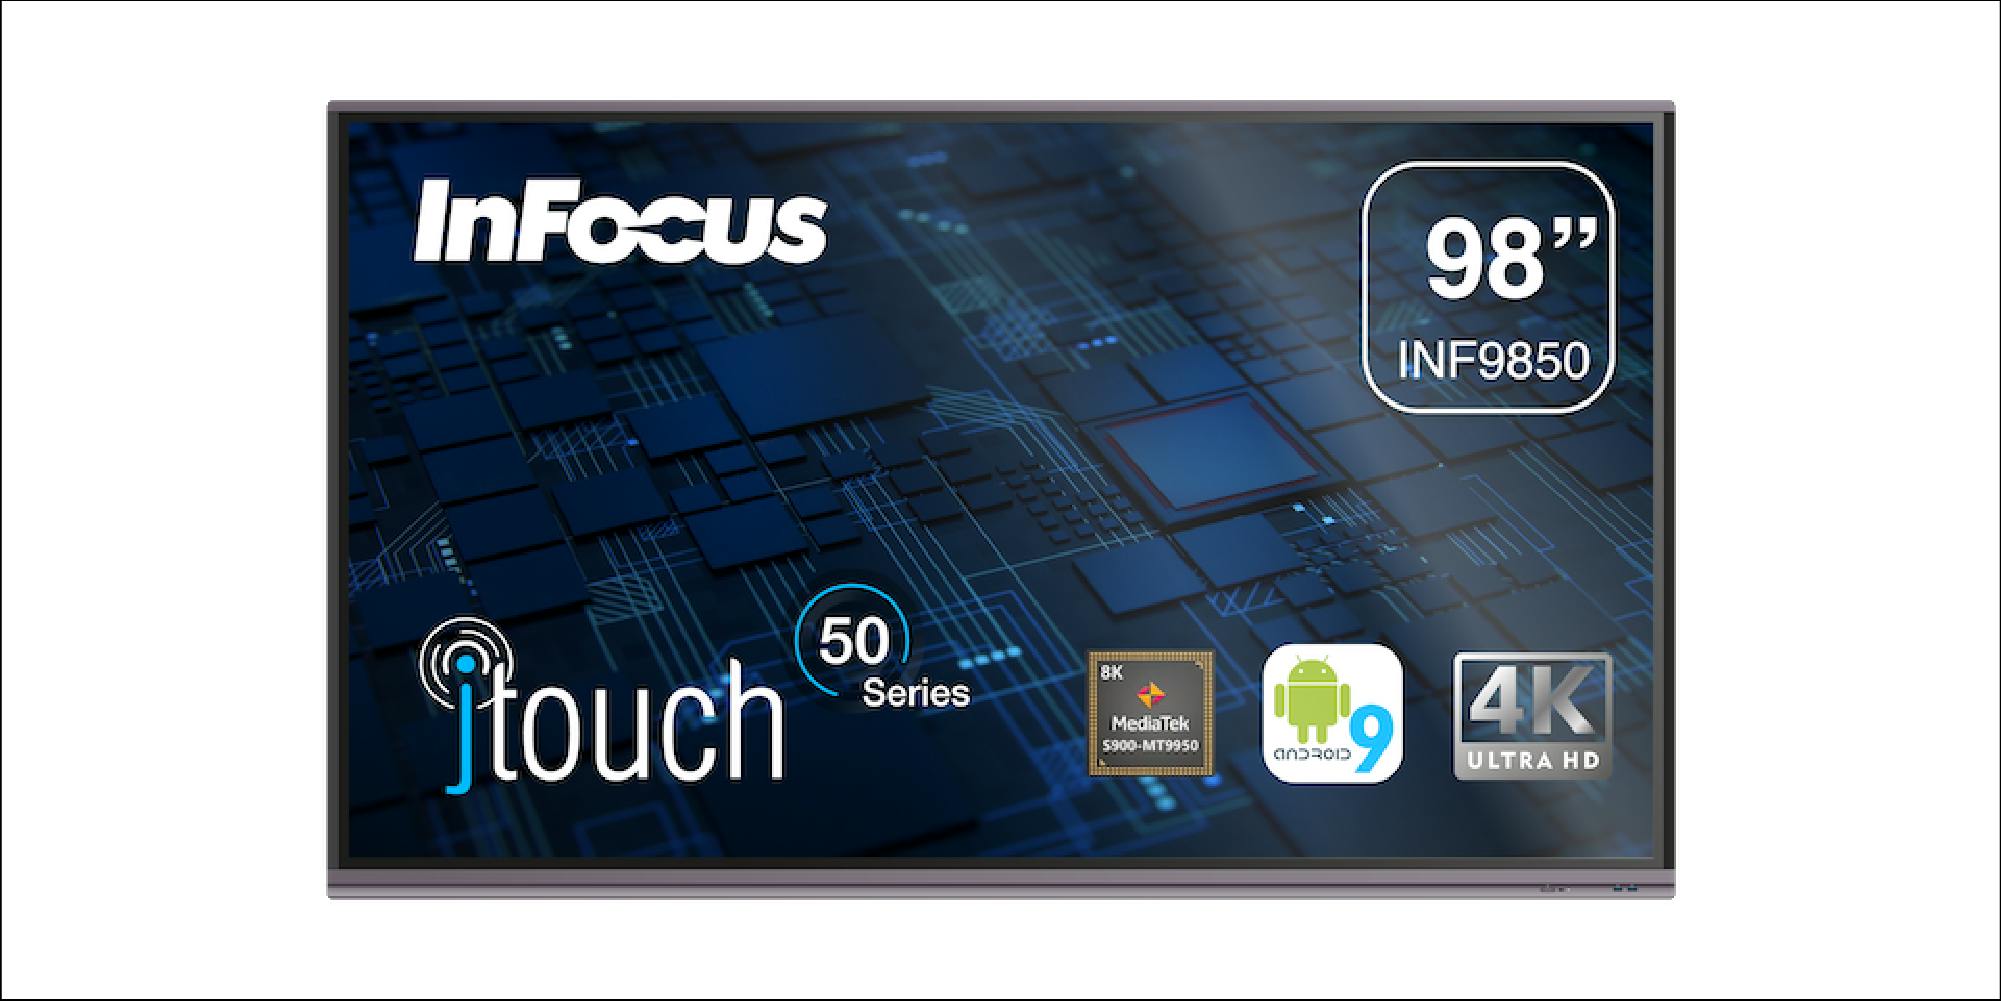 JTouch Series 50 - INF9850